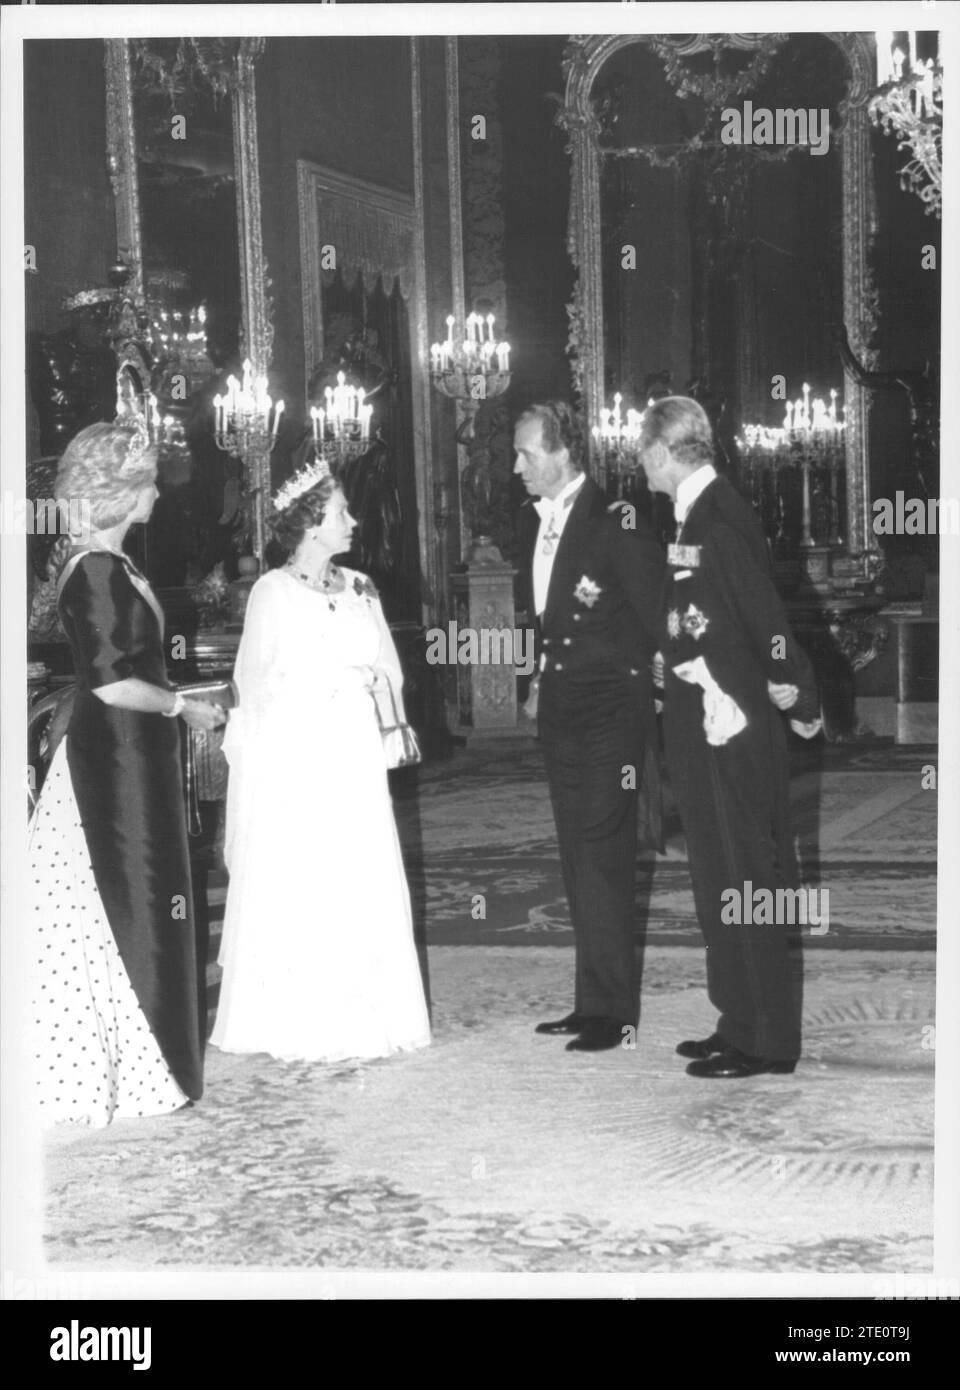 10/17/1988. Isabel Ii in Spain: the Kings of Spain offered a gala dinner at the Royal Palace. In the Image, Don Juan Carlos and Doña Sofía talk with Queen Elizabeth II and the Duke of Edinburgh. Credit: Album / Archivo ABC Stock Photo